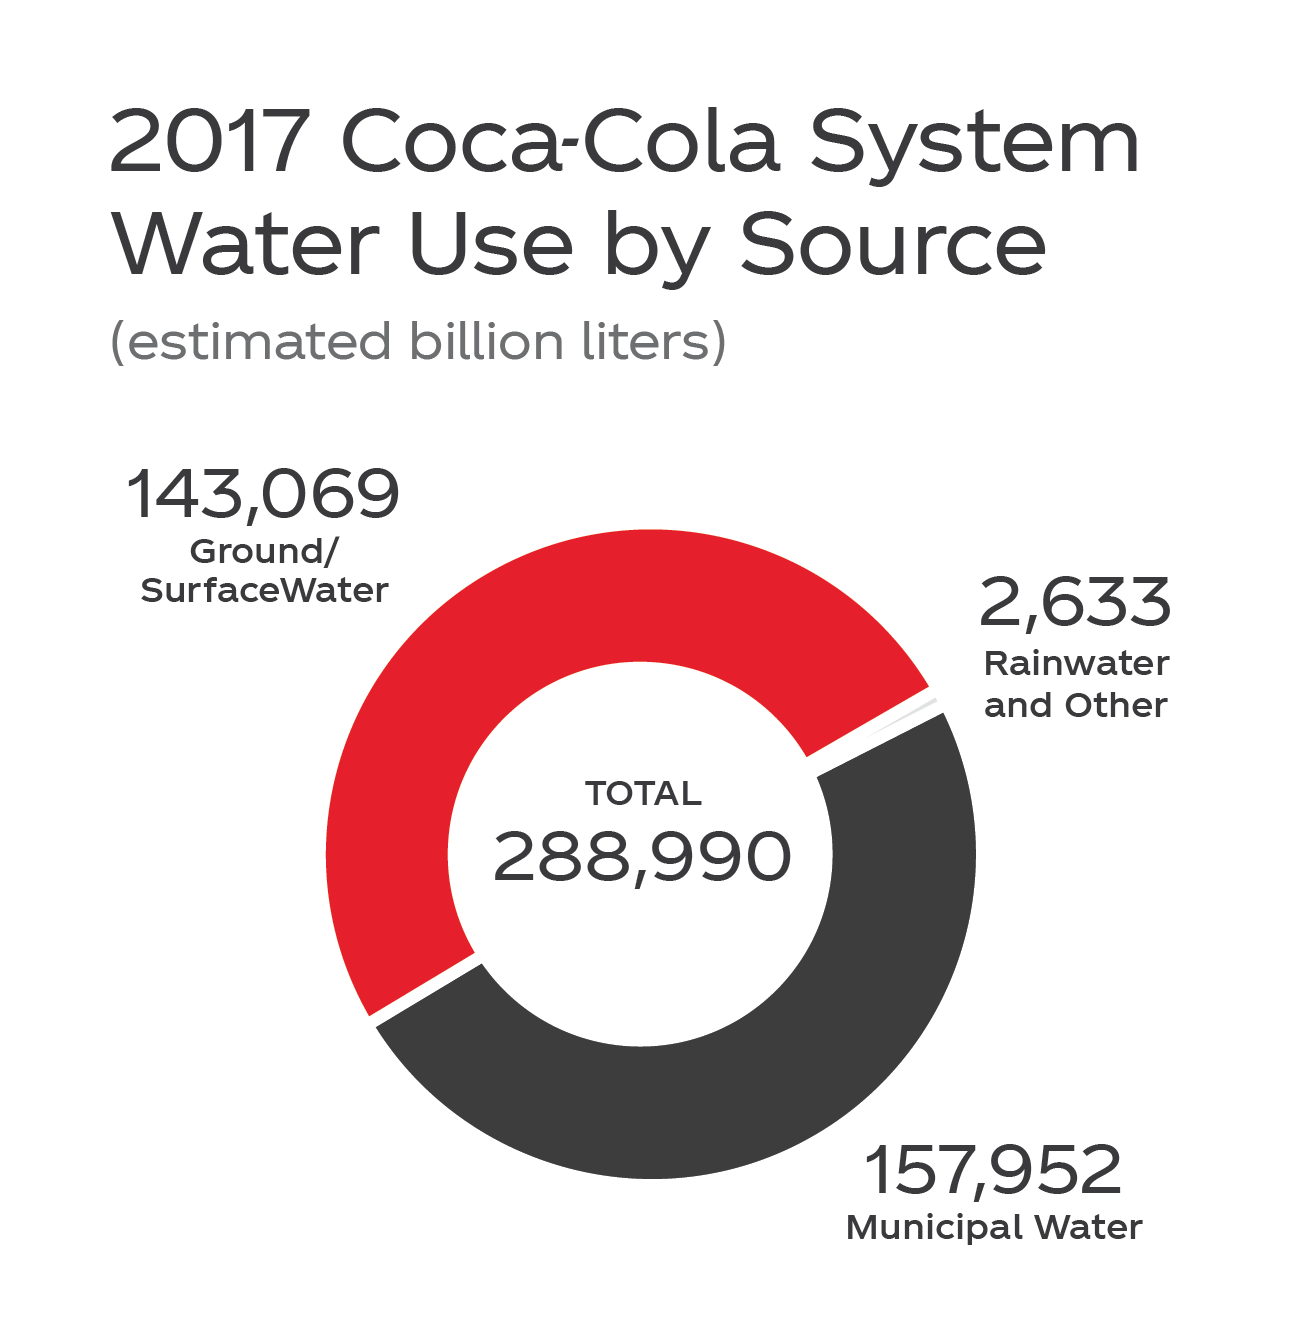 Coca-cola system water use